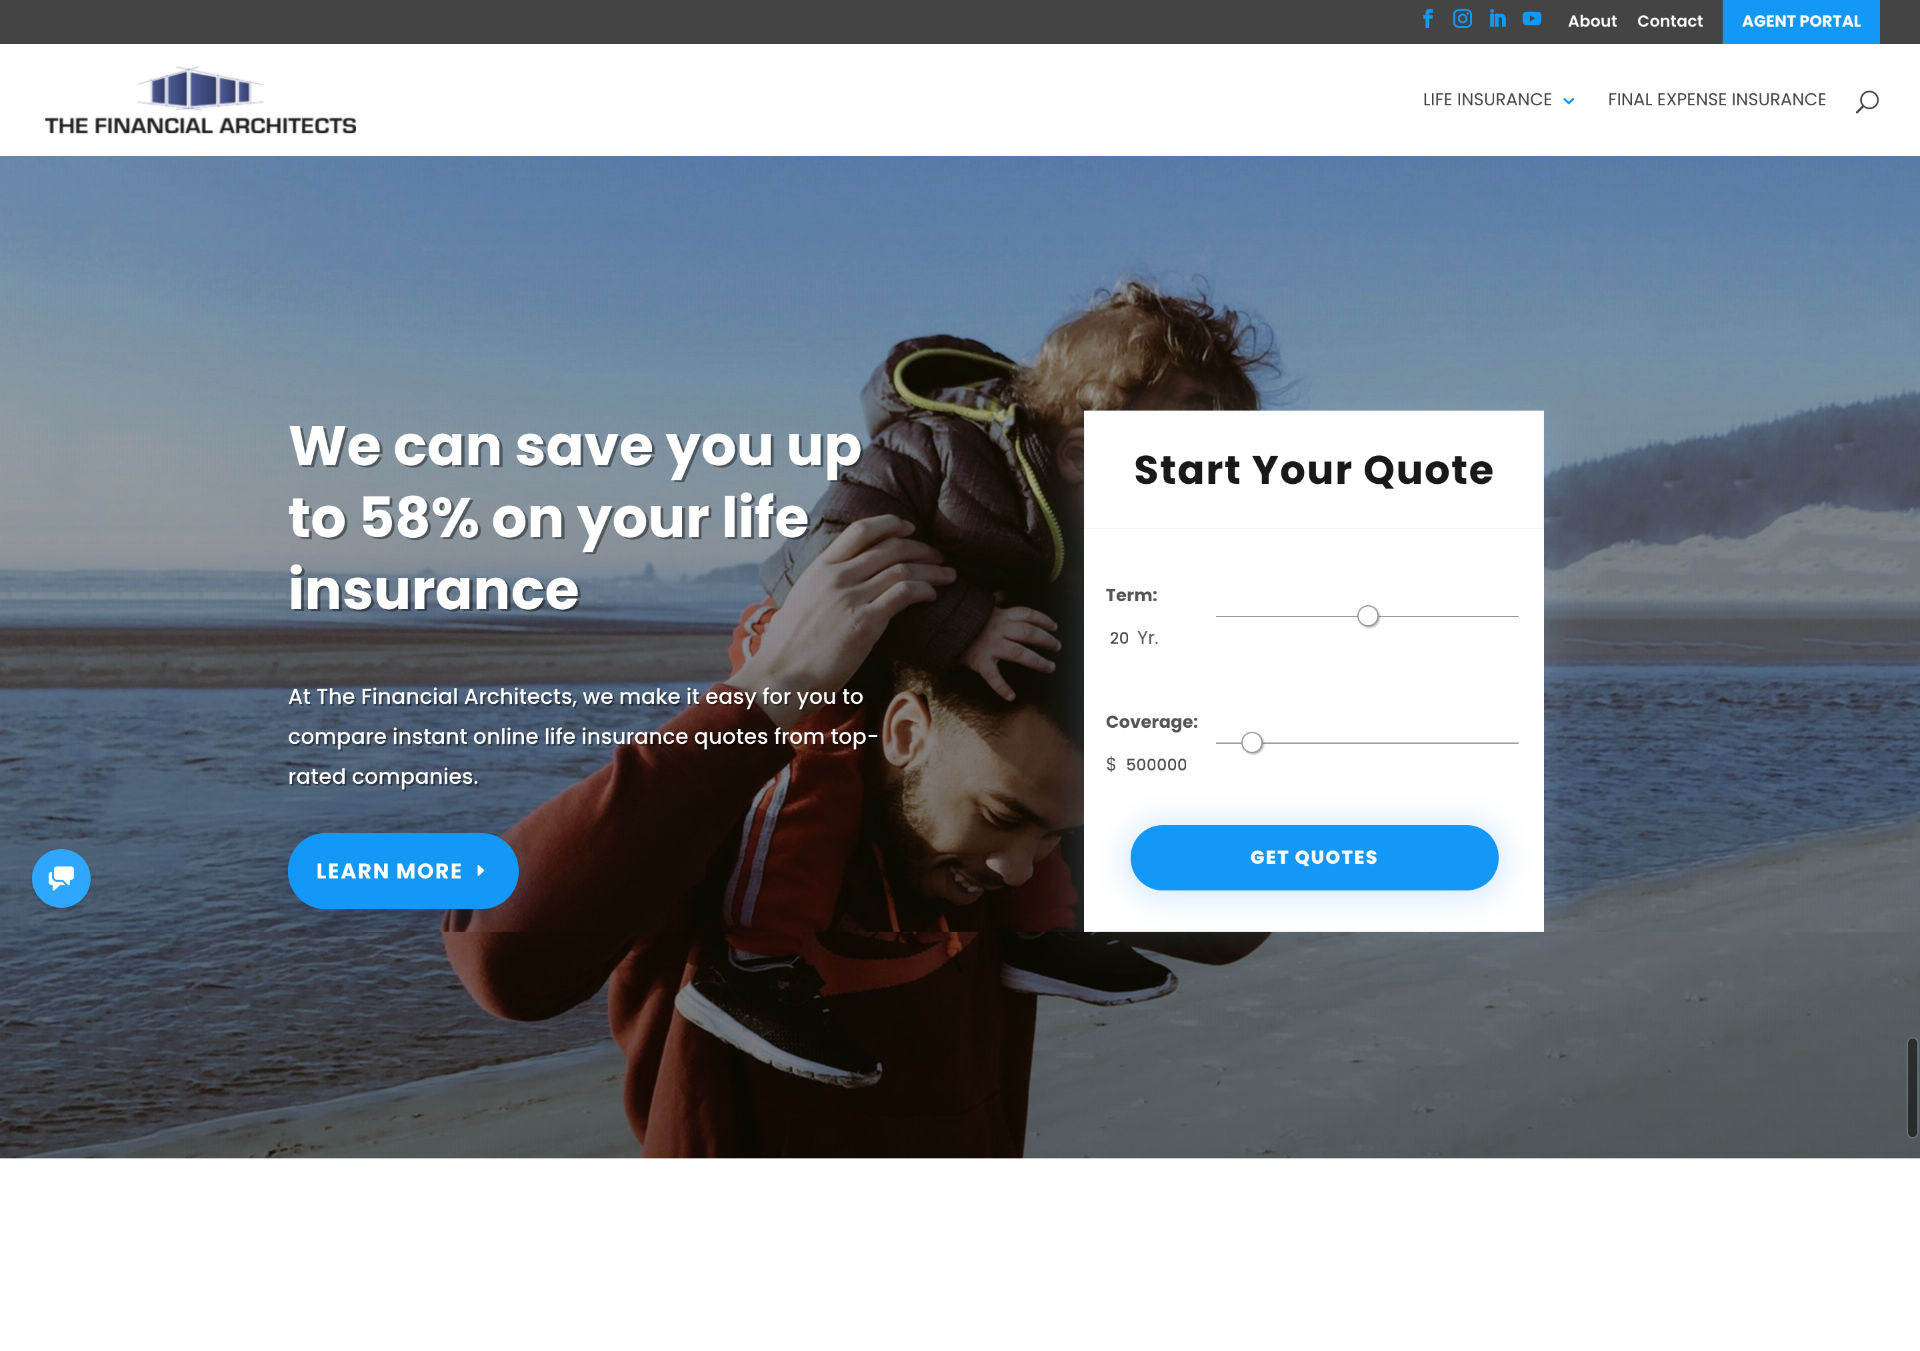 The Financial Architects Compare Instant Online Life Insurance Quotes (2)